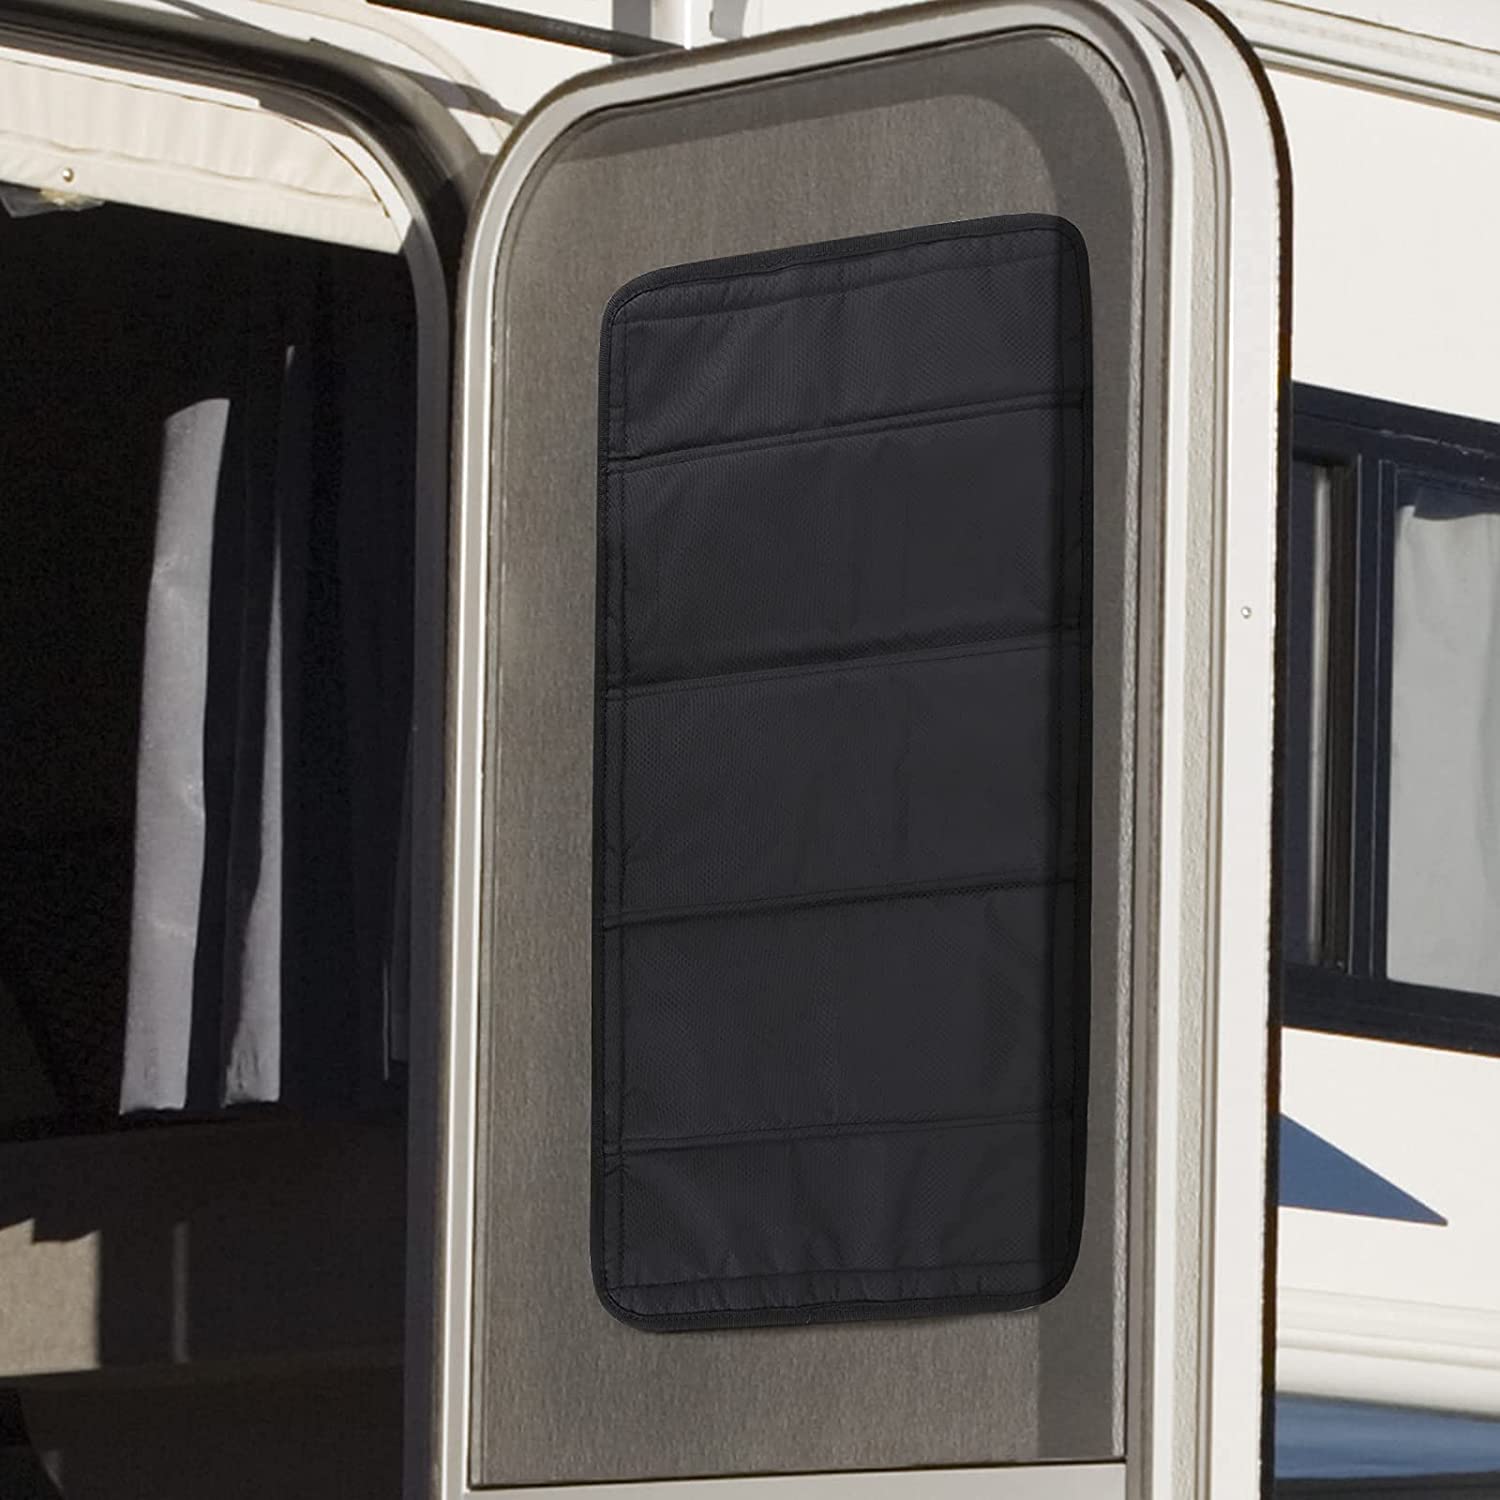 funomo RV Door Window Shade, Foldable Magnet RV Blackout Window Cover, UV  Rays Protection Camper Trailer Window Cover, Waterproof Thickened Oxford  and